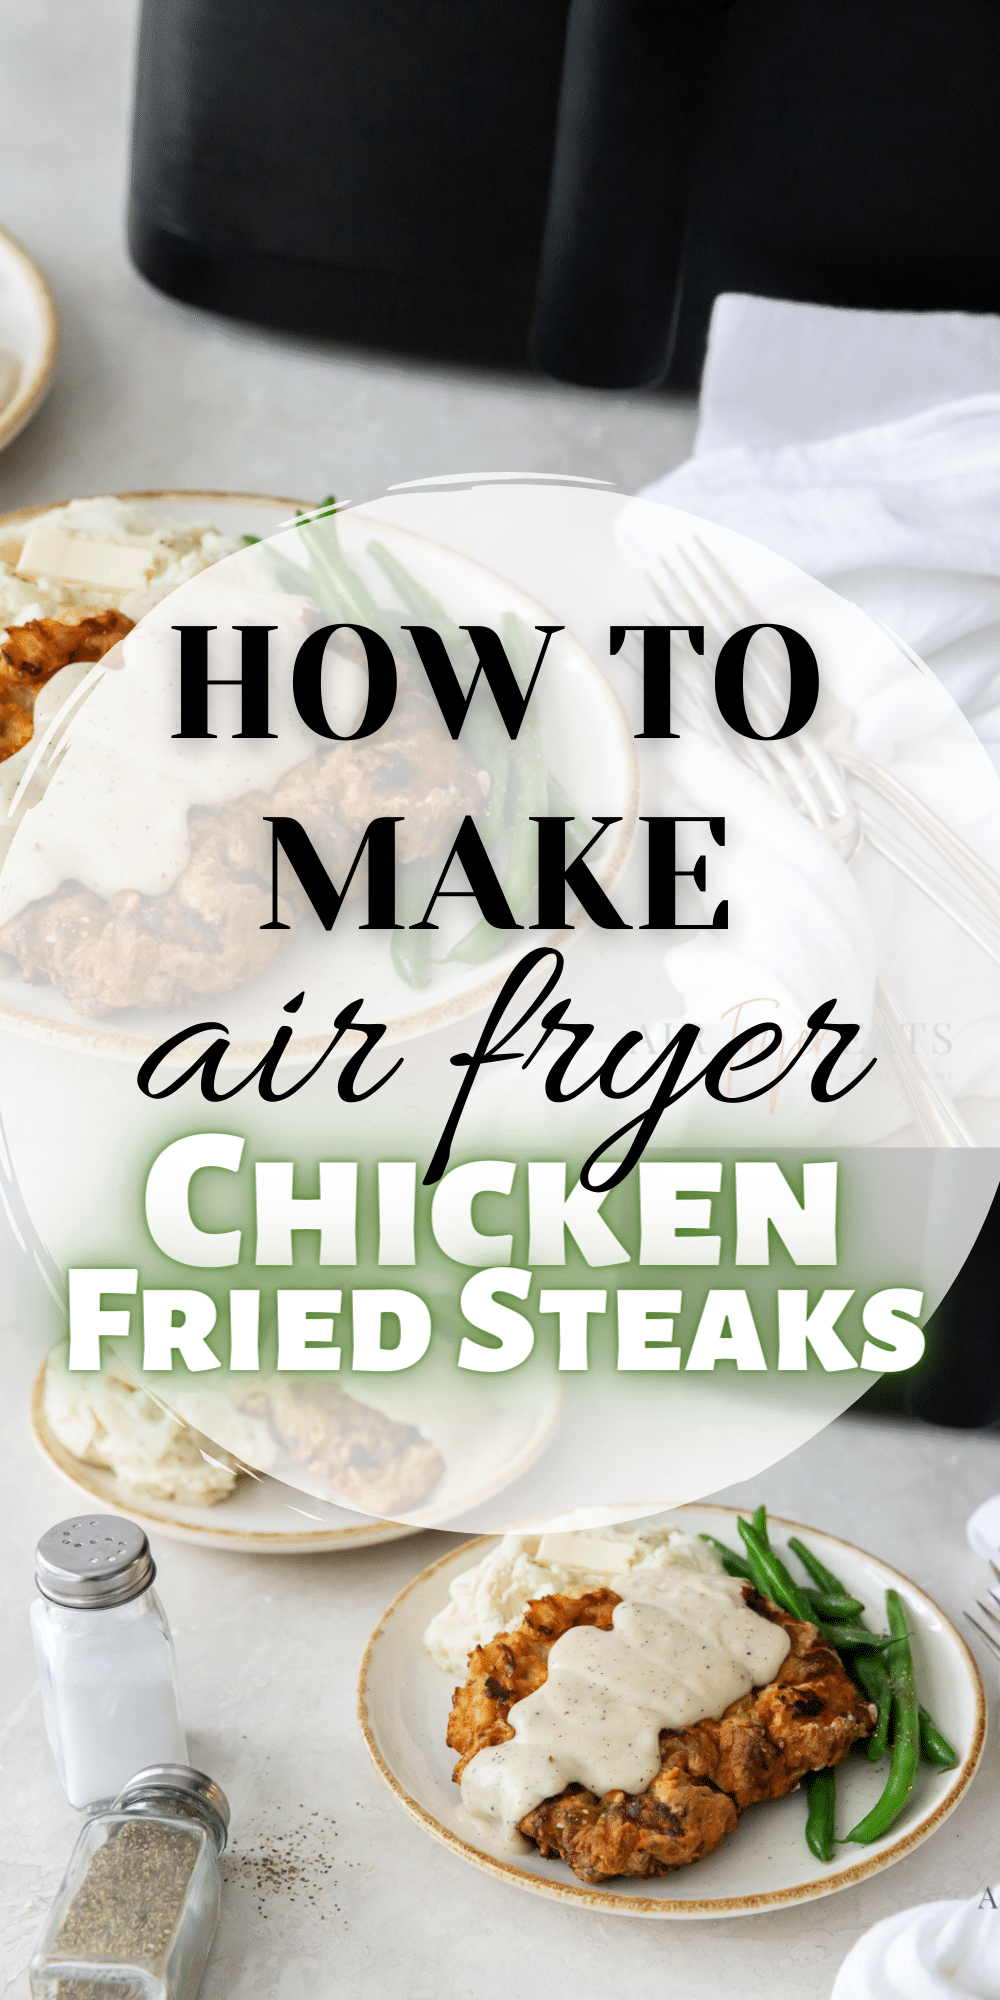 Air Fryer Chicken Fried Steak with a creamy, peppery, country gravy is a traditional Southern dinner, made healthier and with less mess using your favorite kitchen appliance. #airfryersteak #chickenfriedsteak via @vegetarianmamma